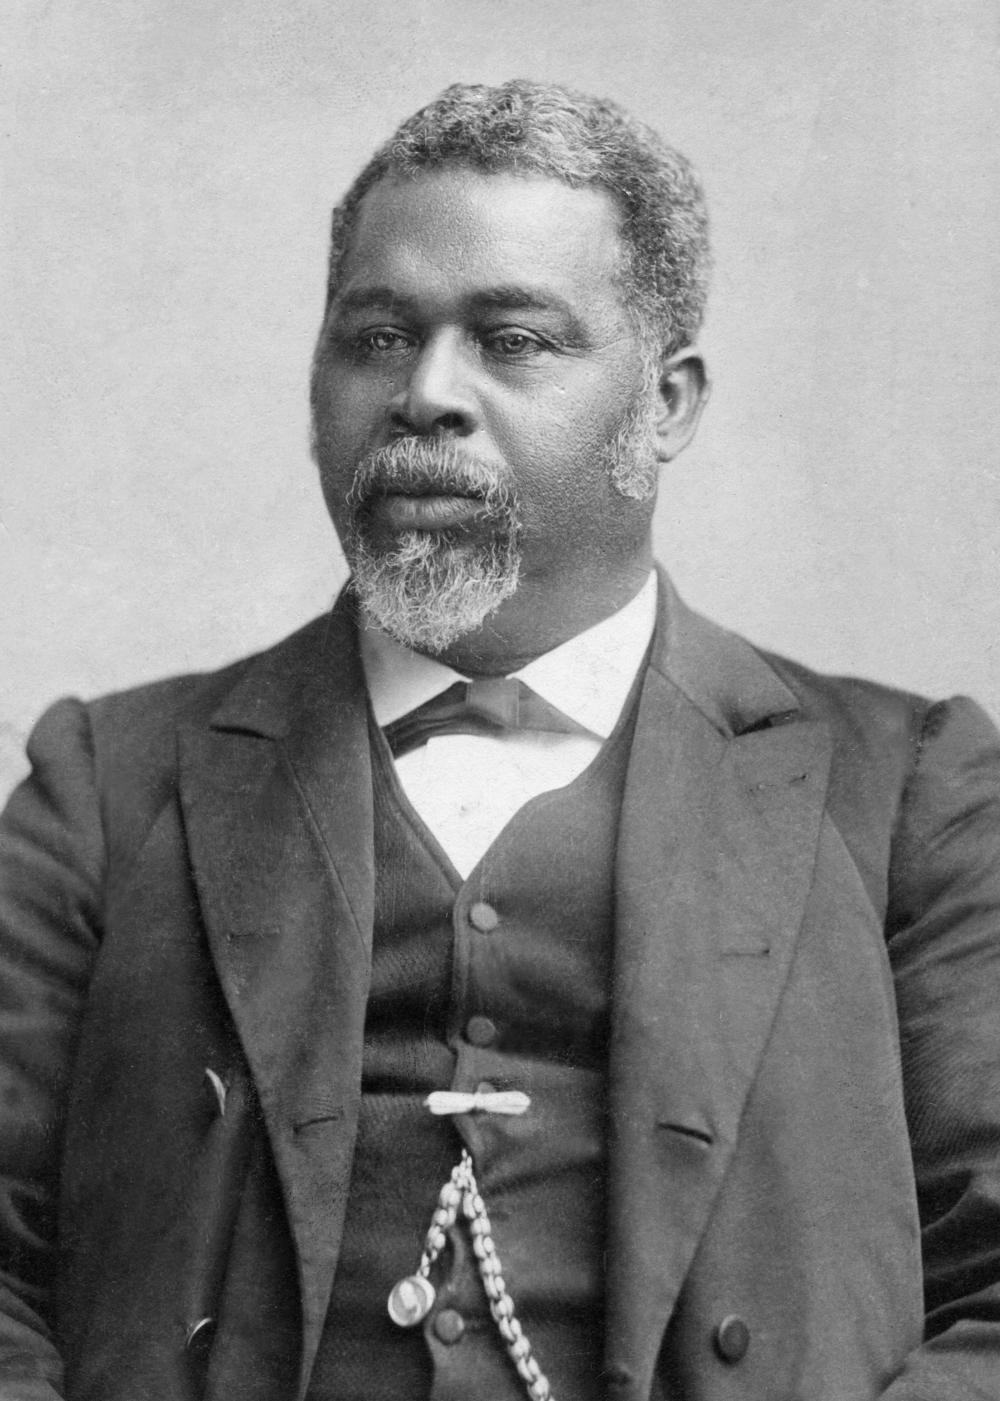 Robert Smalls, a Civil War hero who escaped from slavery in 1862. Smalls was the first Black man to command a U.S. Naval vessel, and later served in the U.S. House of Representatives.